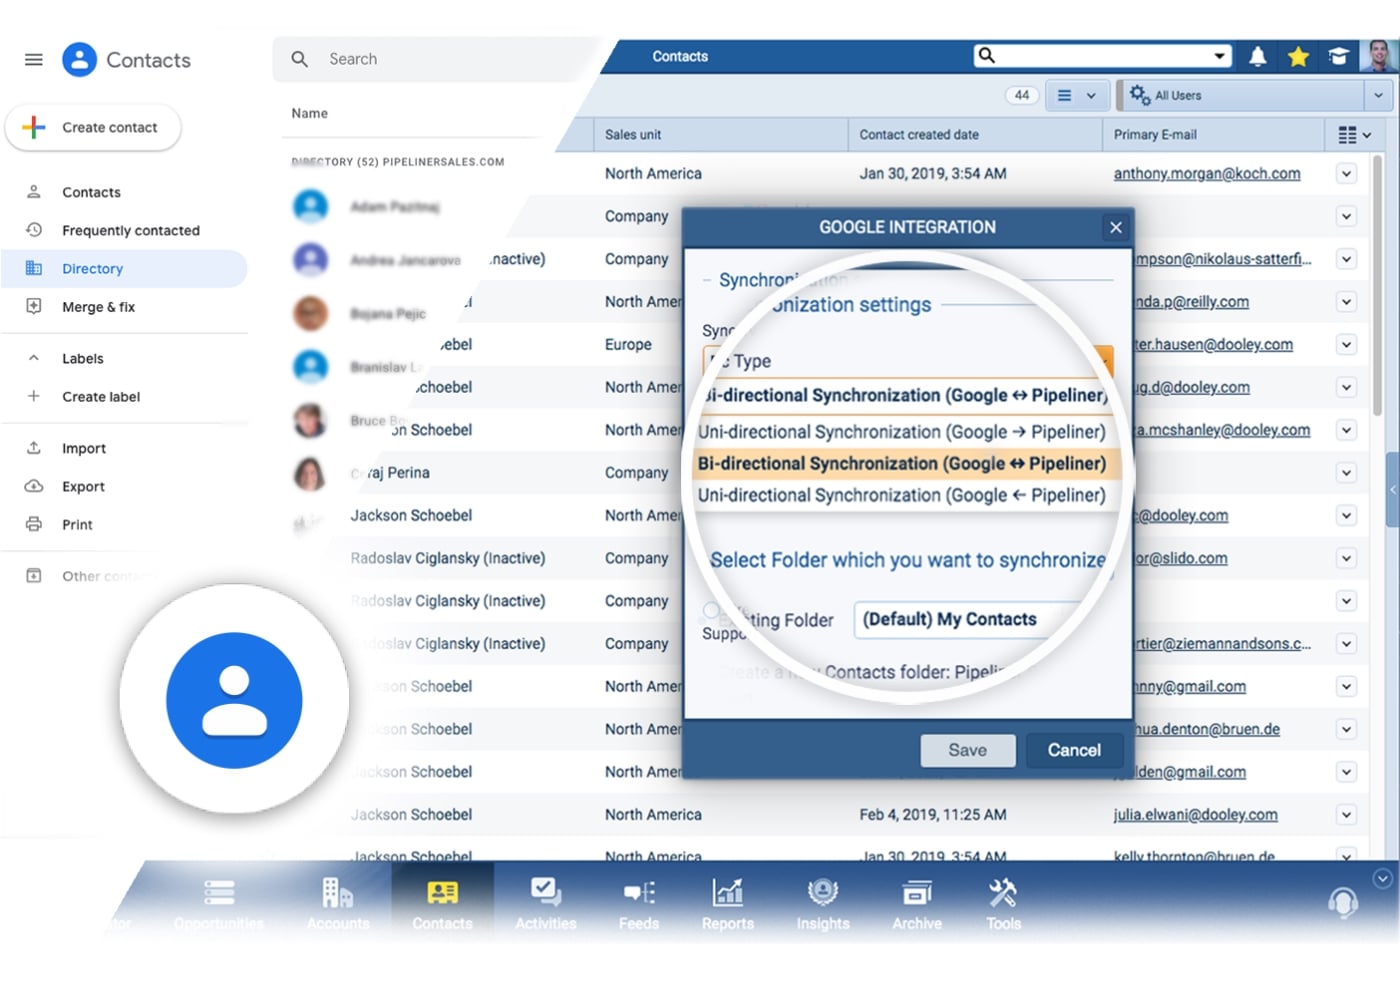 Google contacts integration with Pipeliner CRM